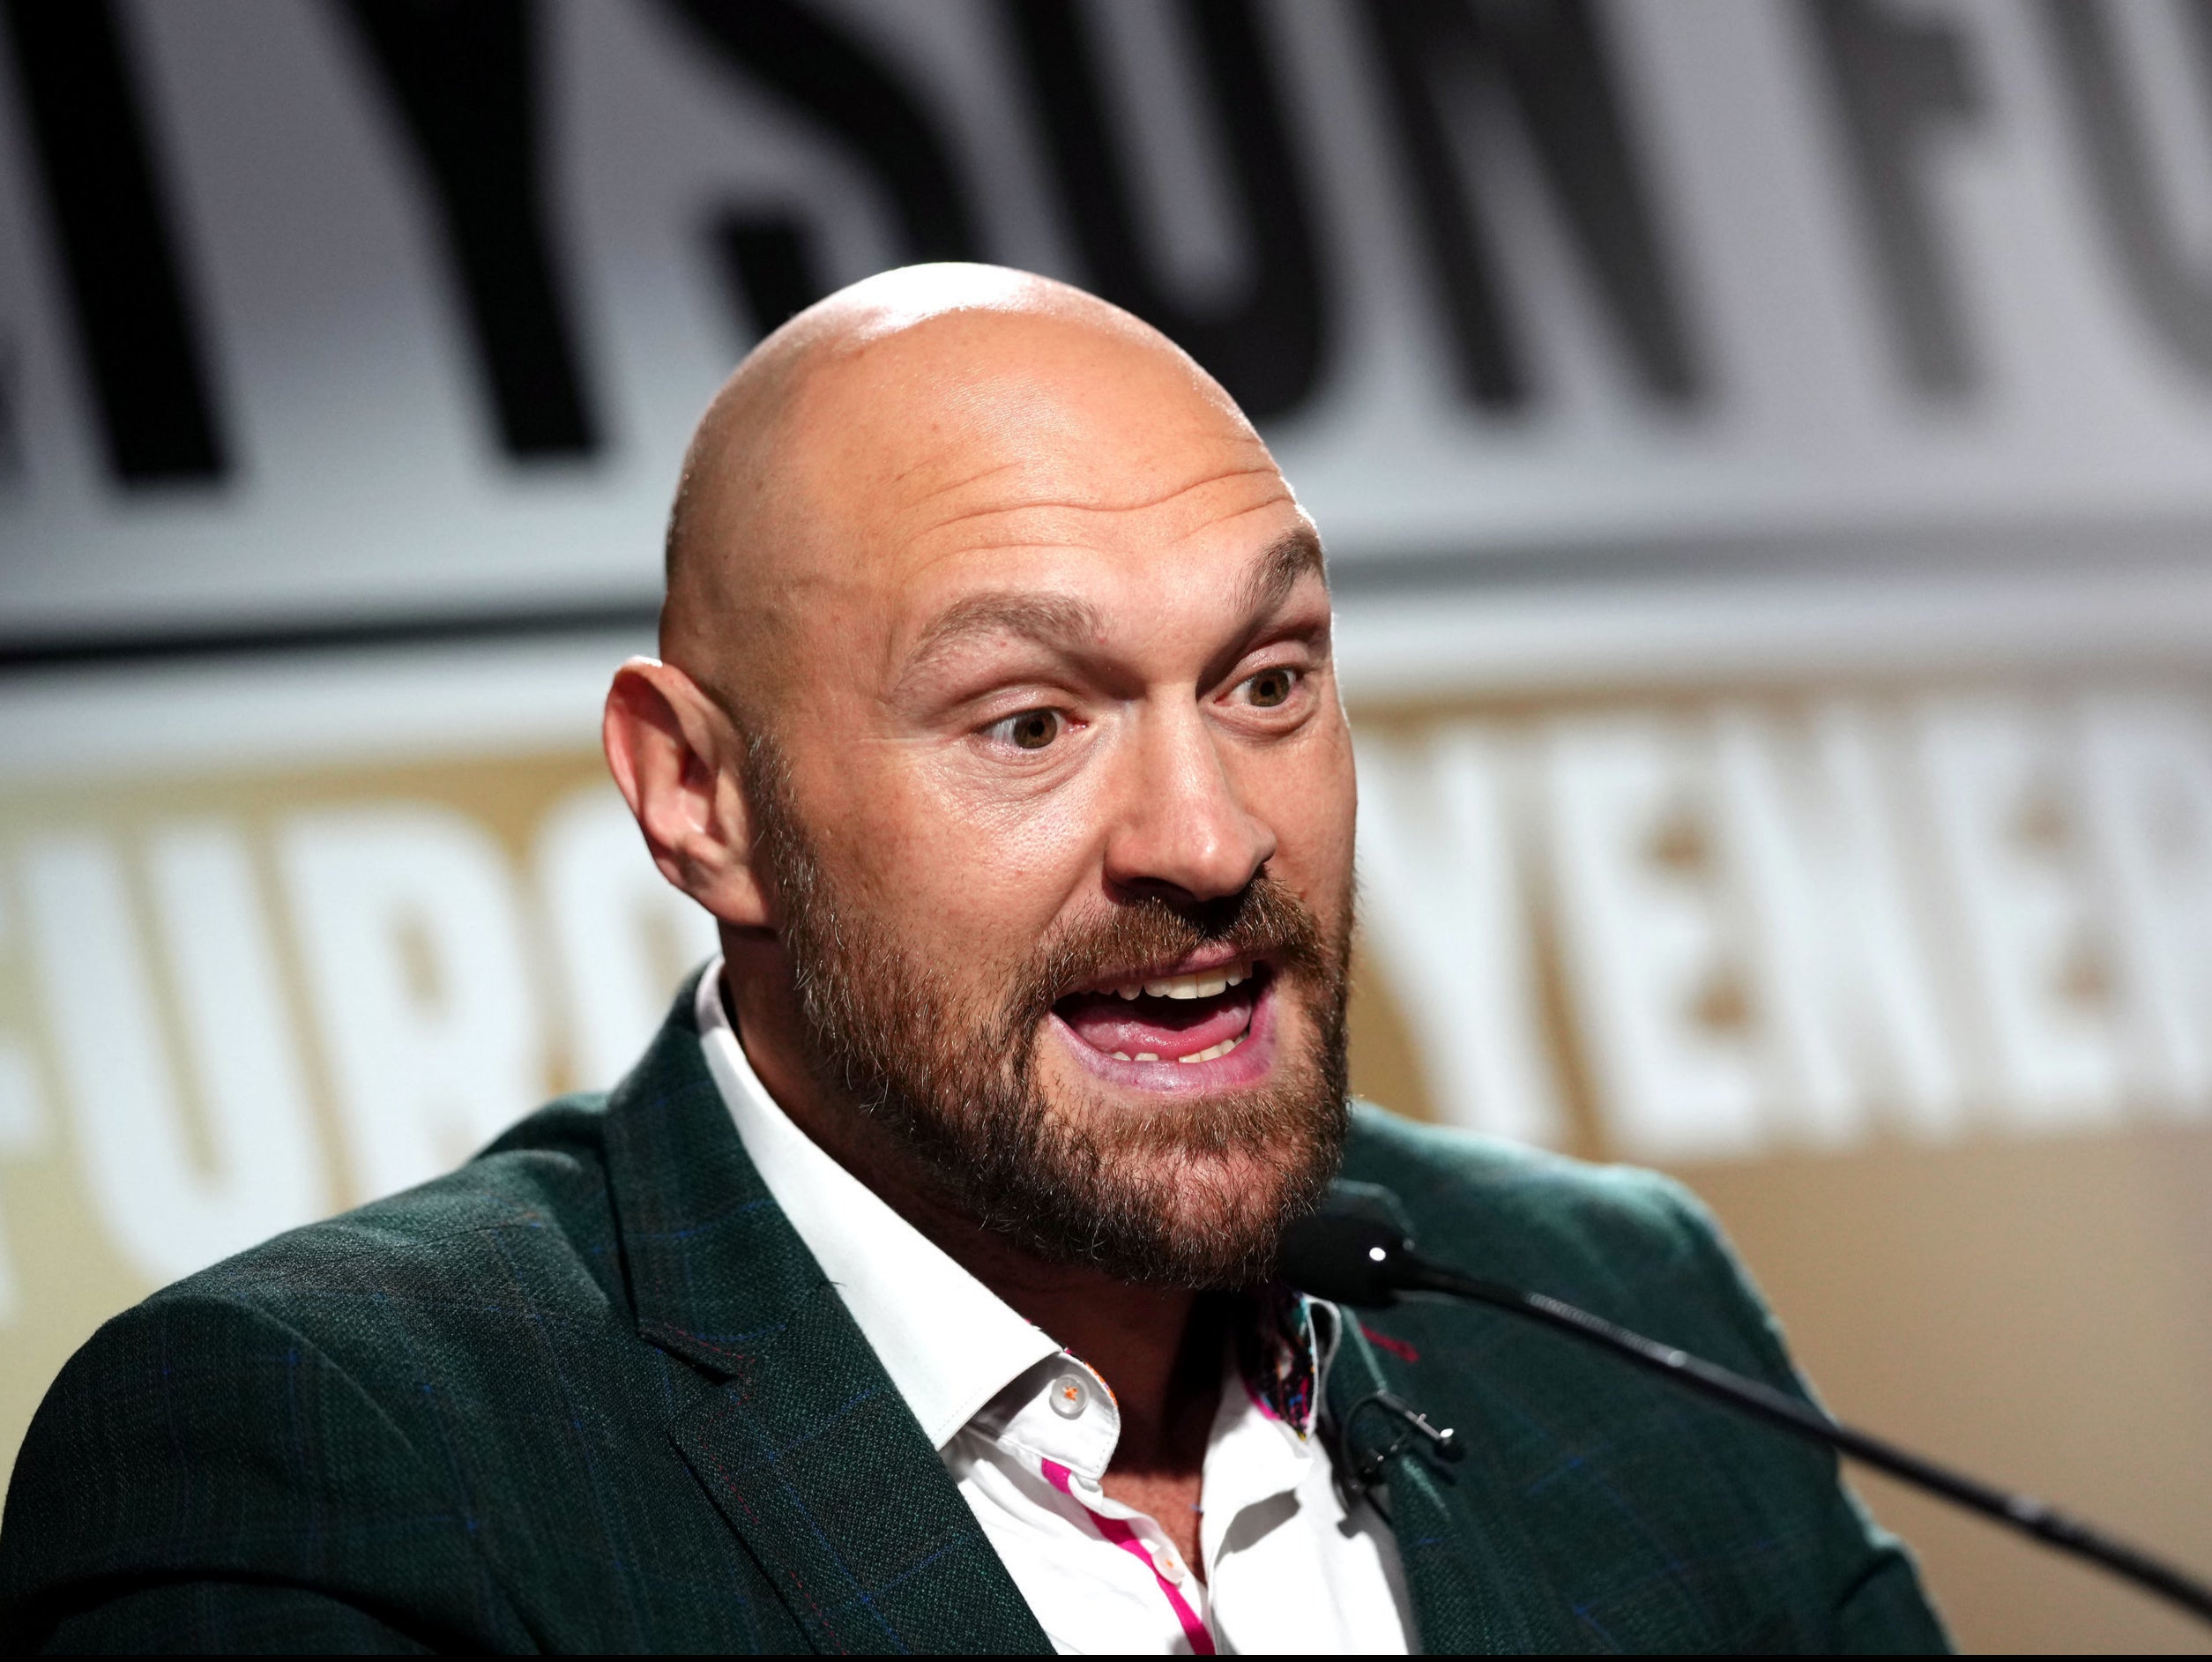 Fury is slated to box Whyte